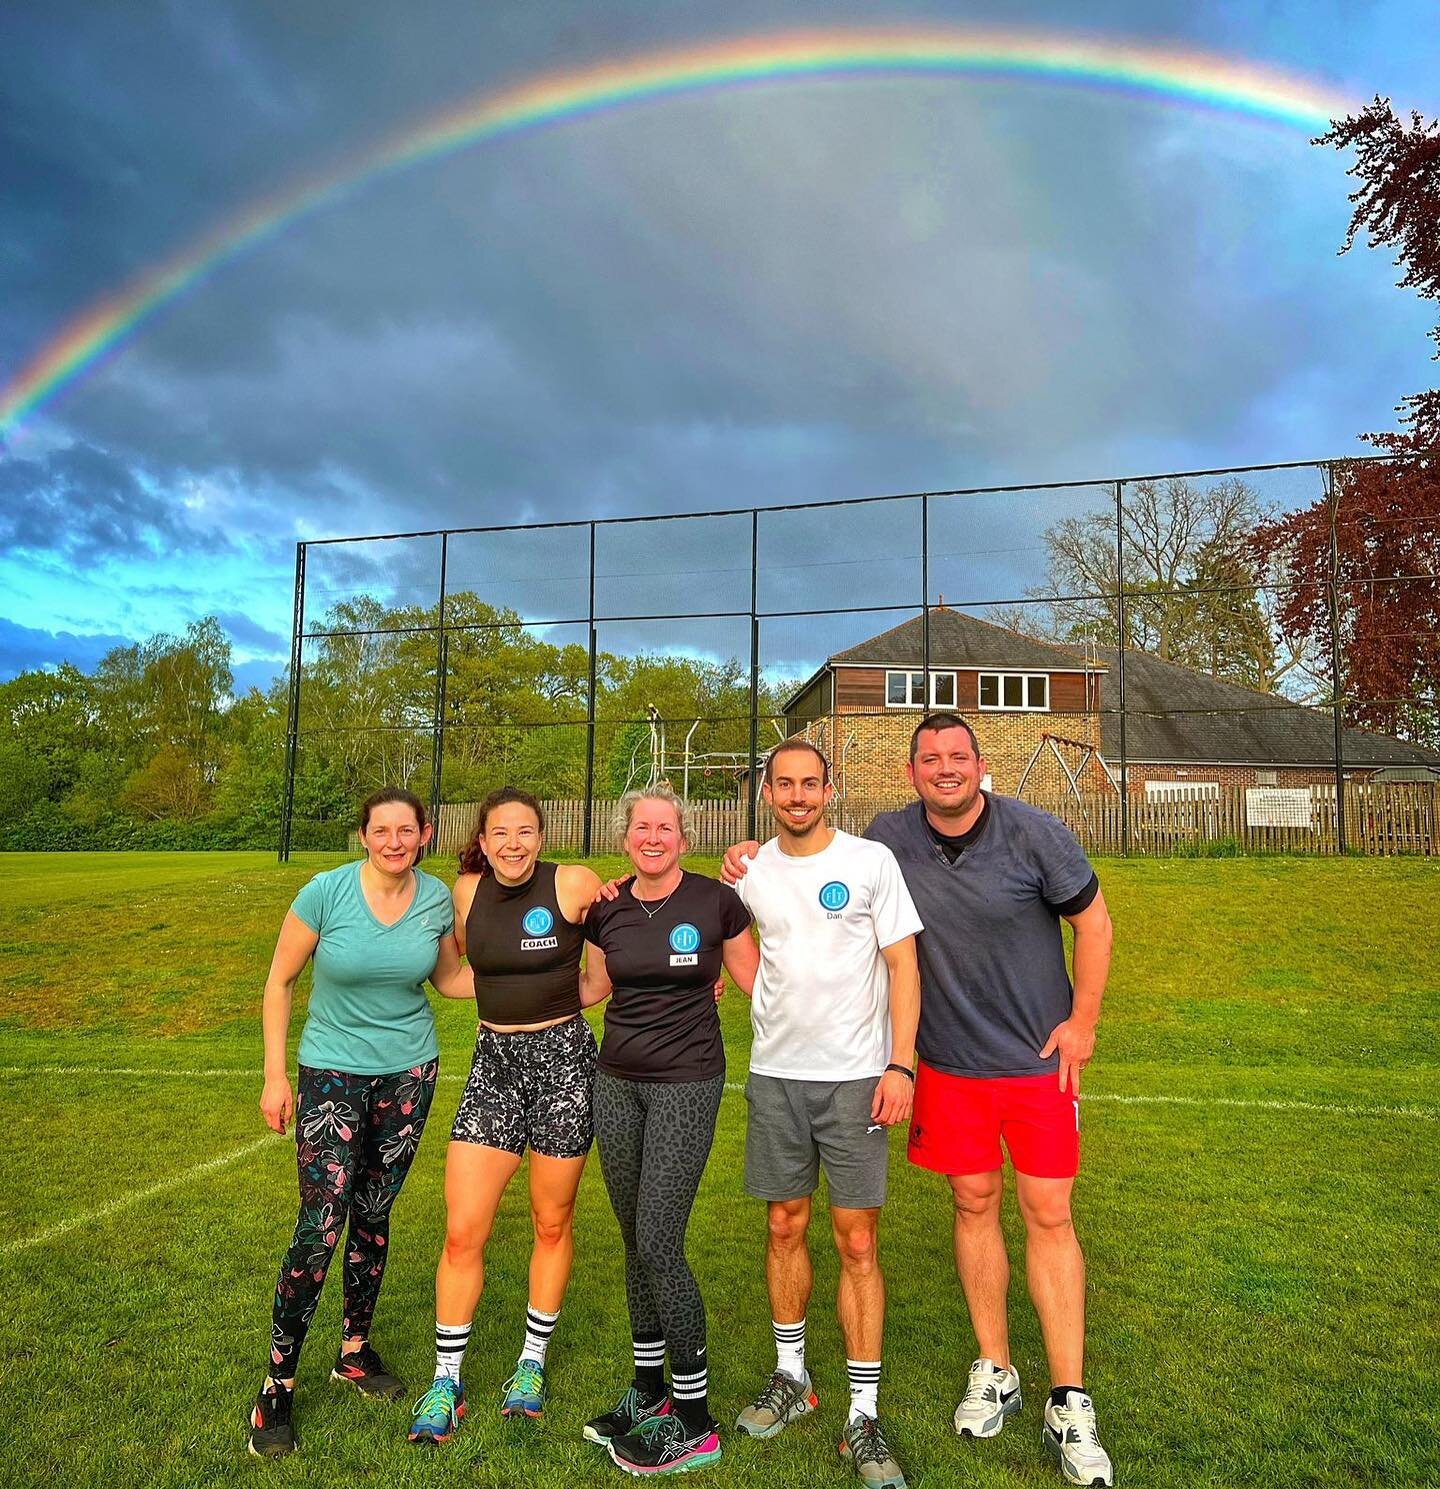 Rainbow came out for our first Thursday group PT session 🌈 that&rsquo;s a good sign for sure! 💙